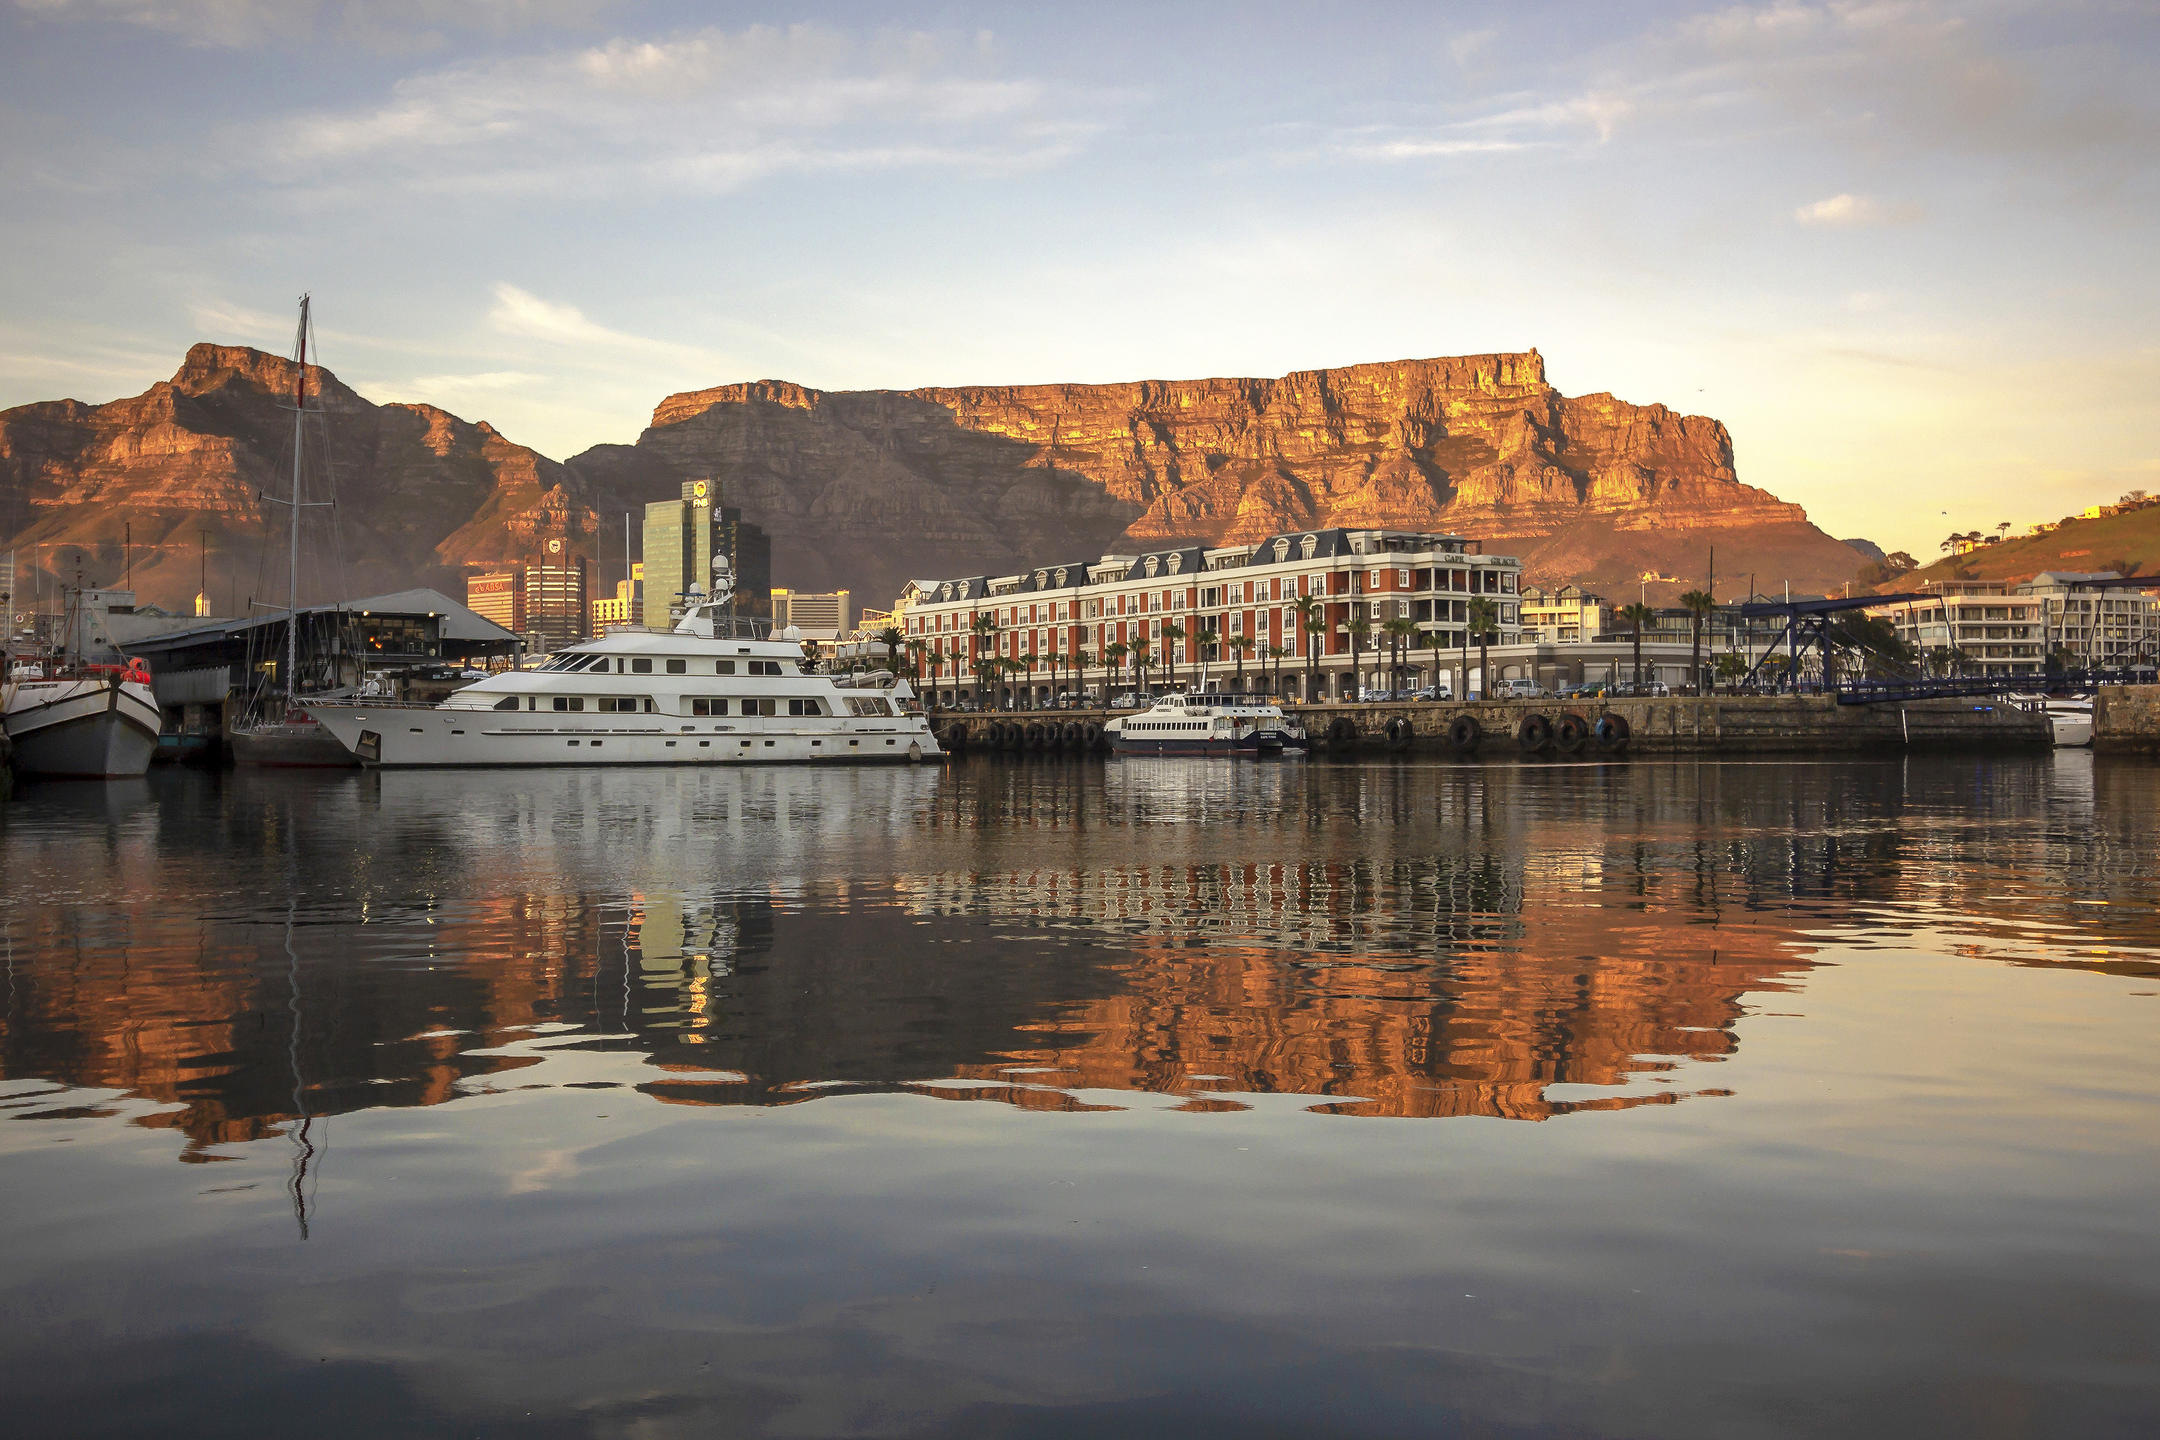 A view of the V&A waterfront from the water during sunset